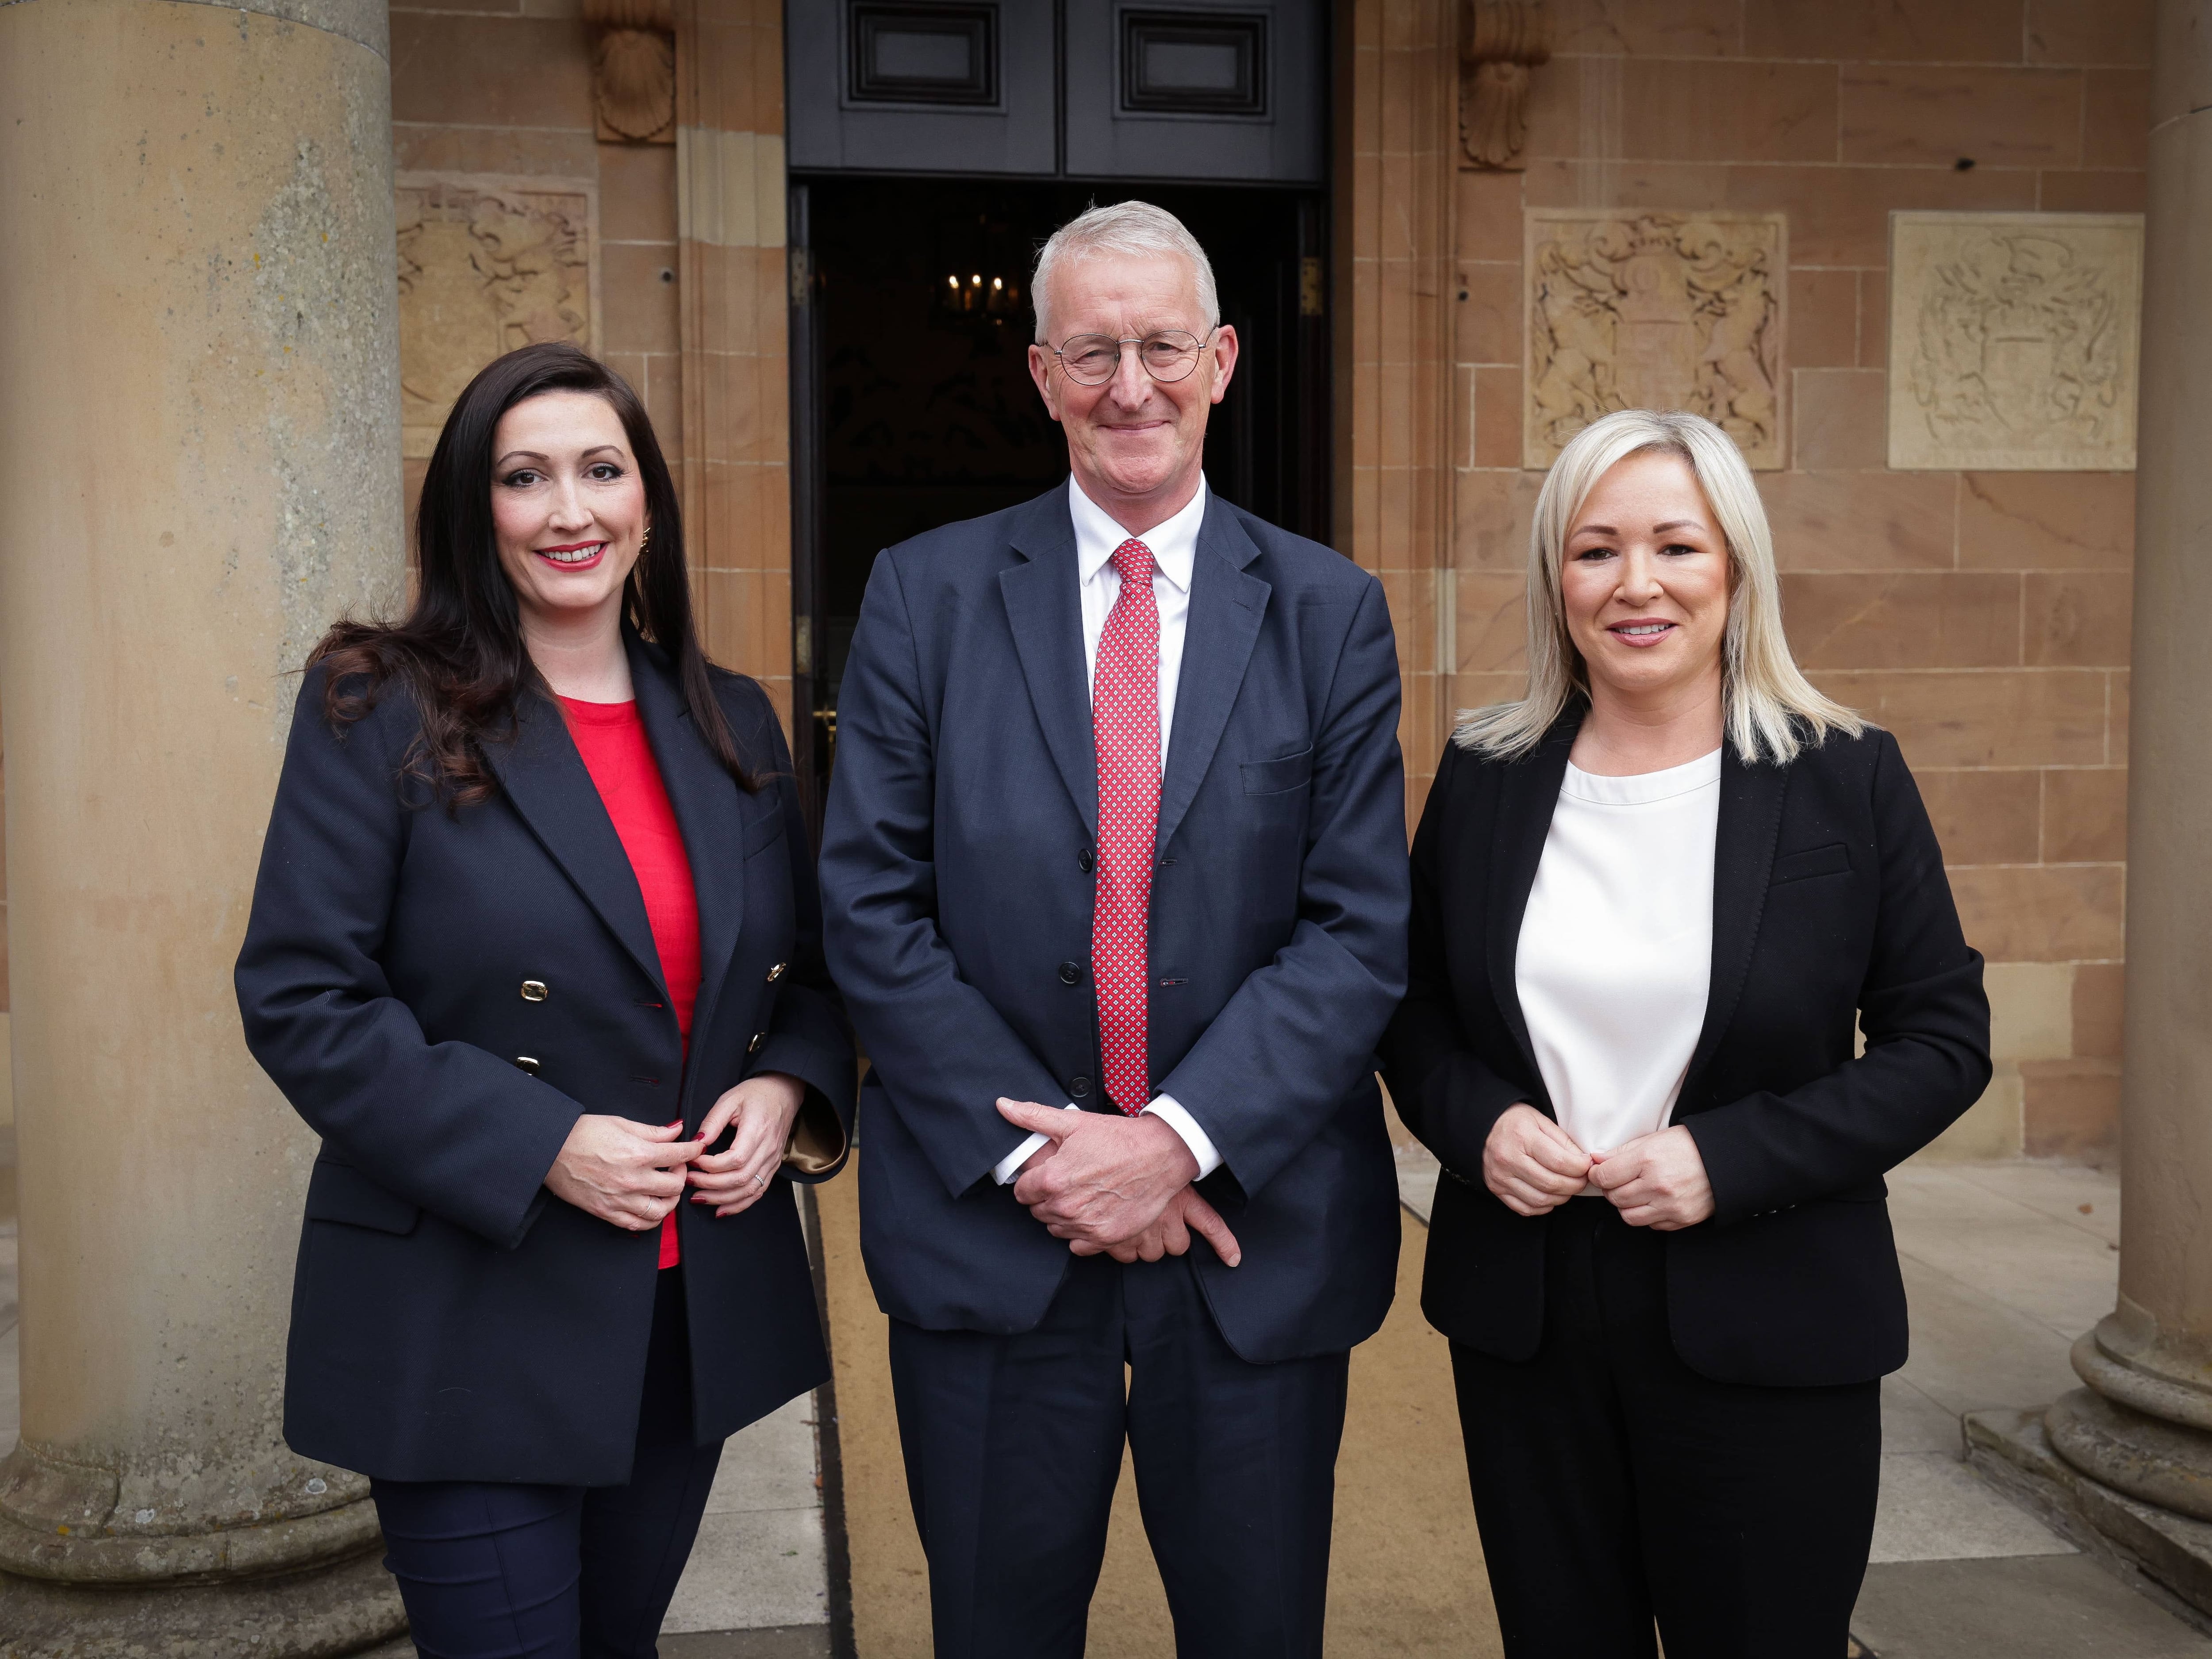 Benn pledges to forge new relationship after meeting O’Neill and Little-Pengelly